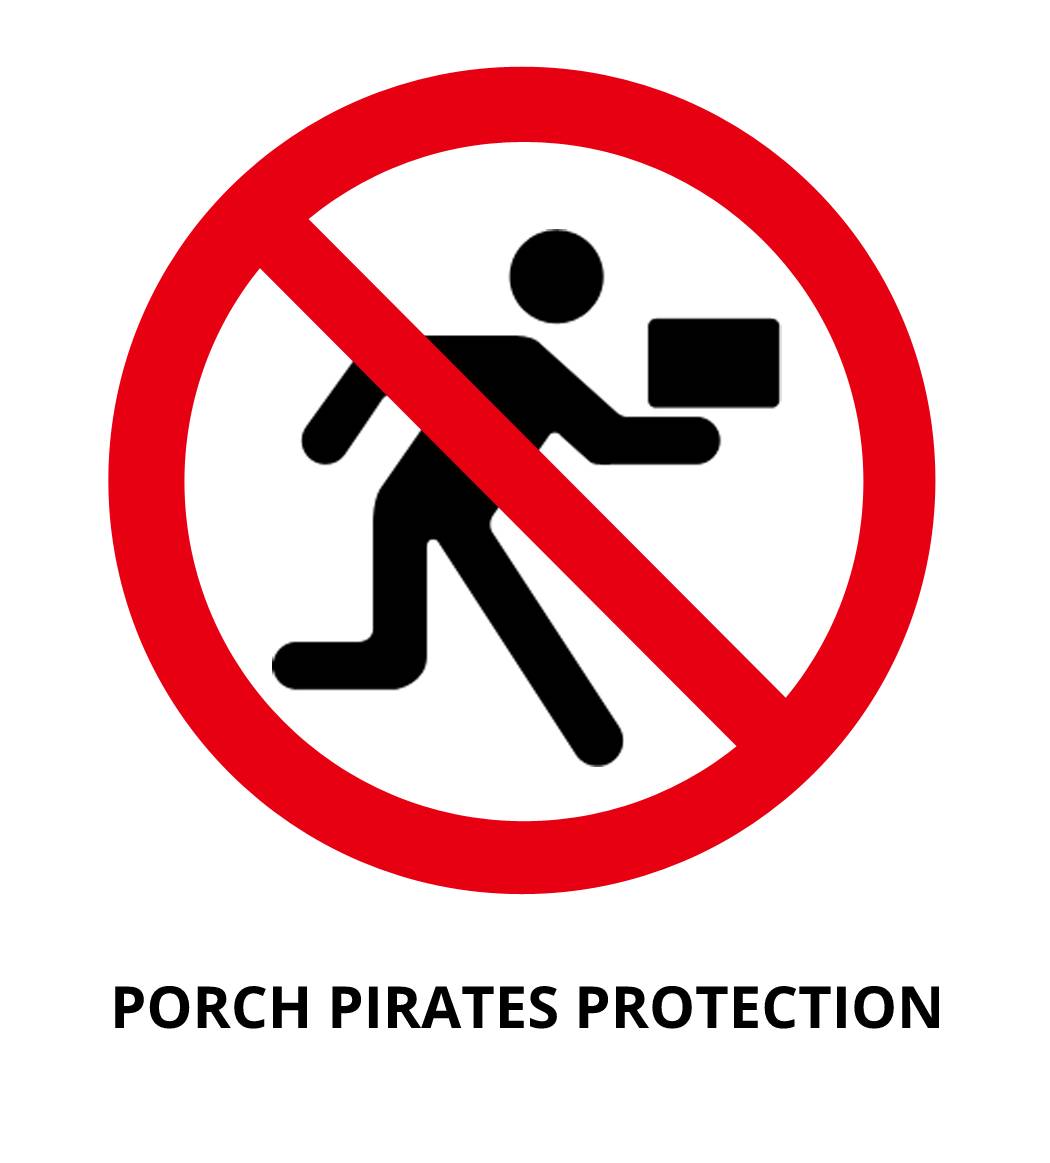 Porch Pirates Protection (rkr)